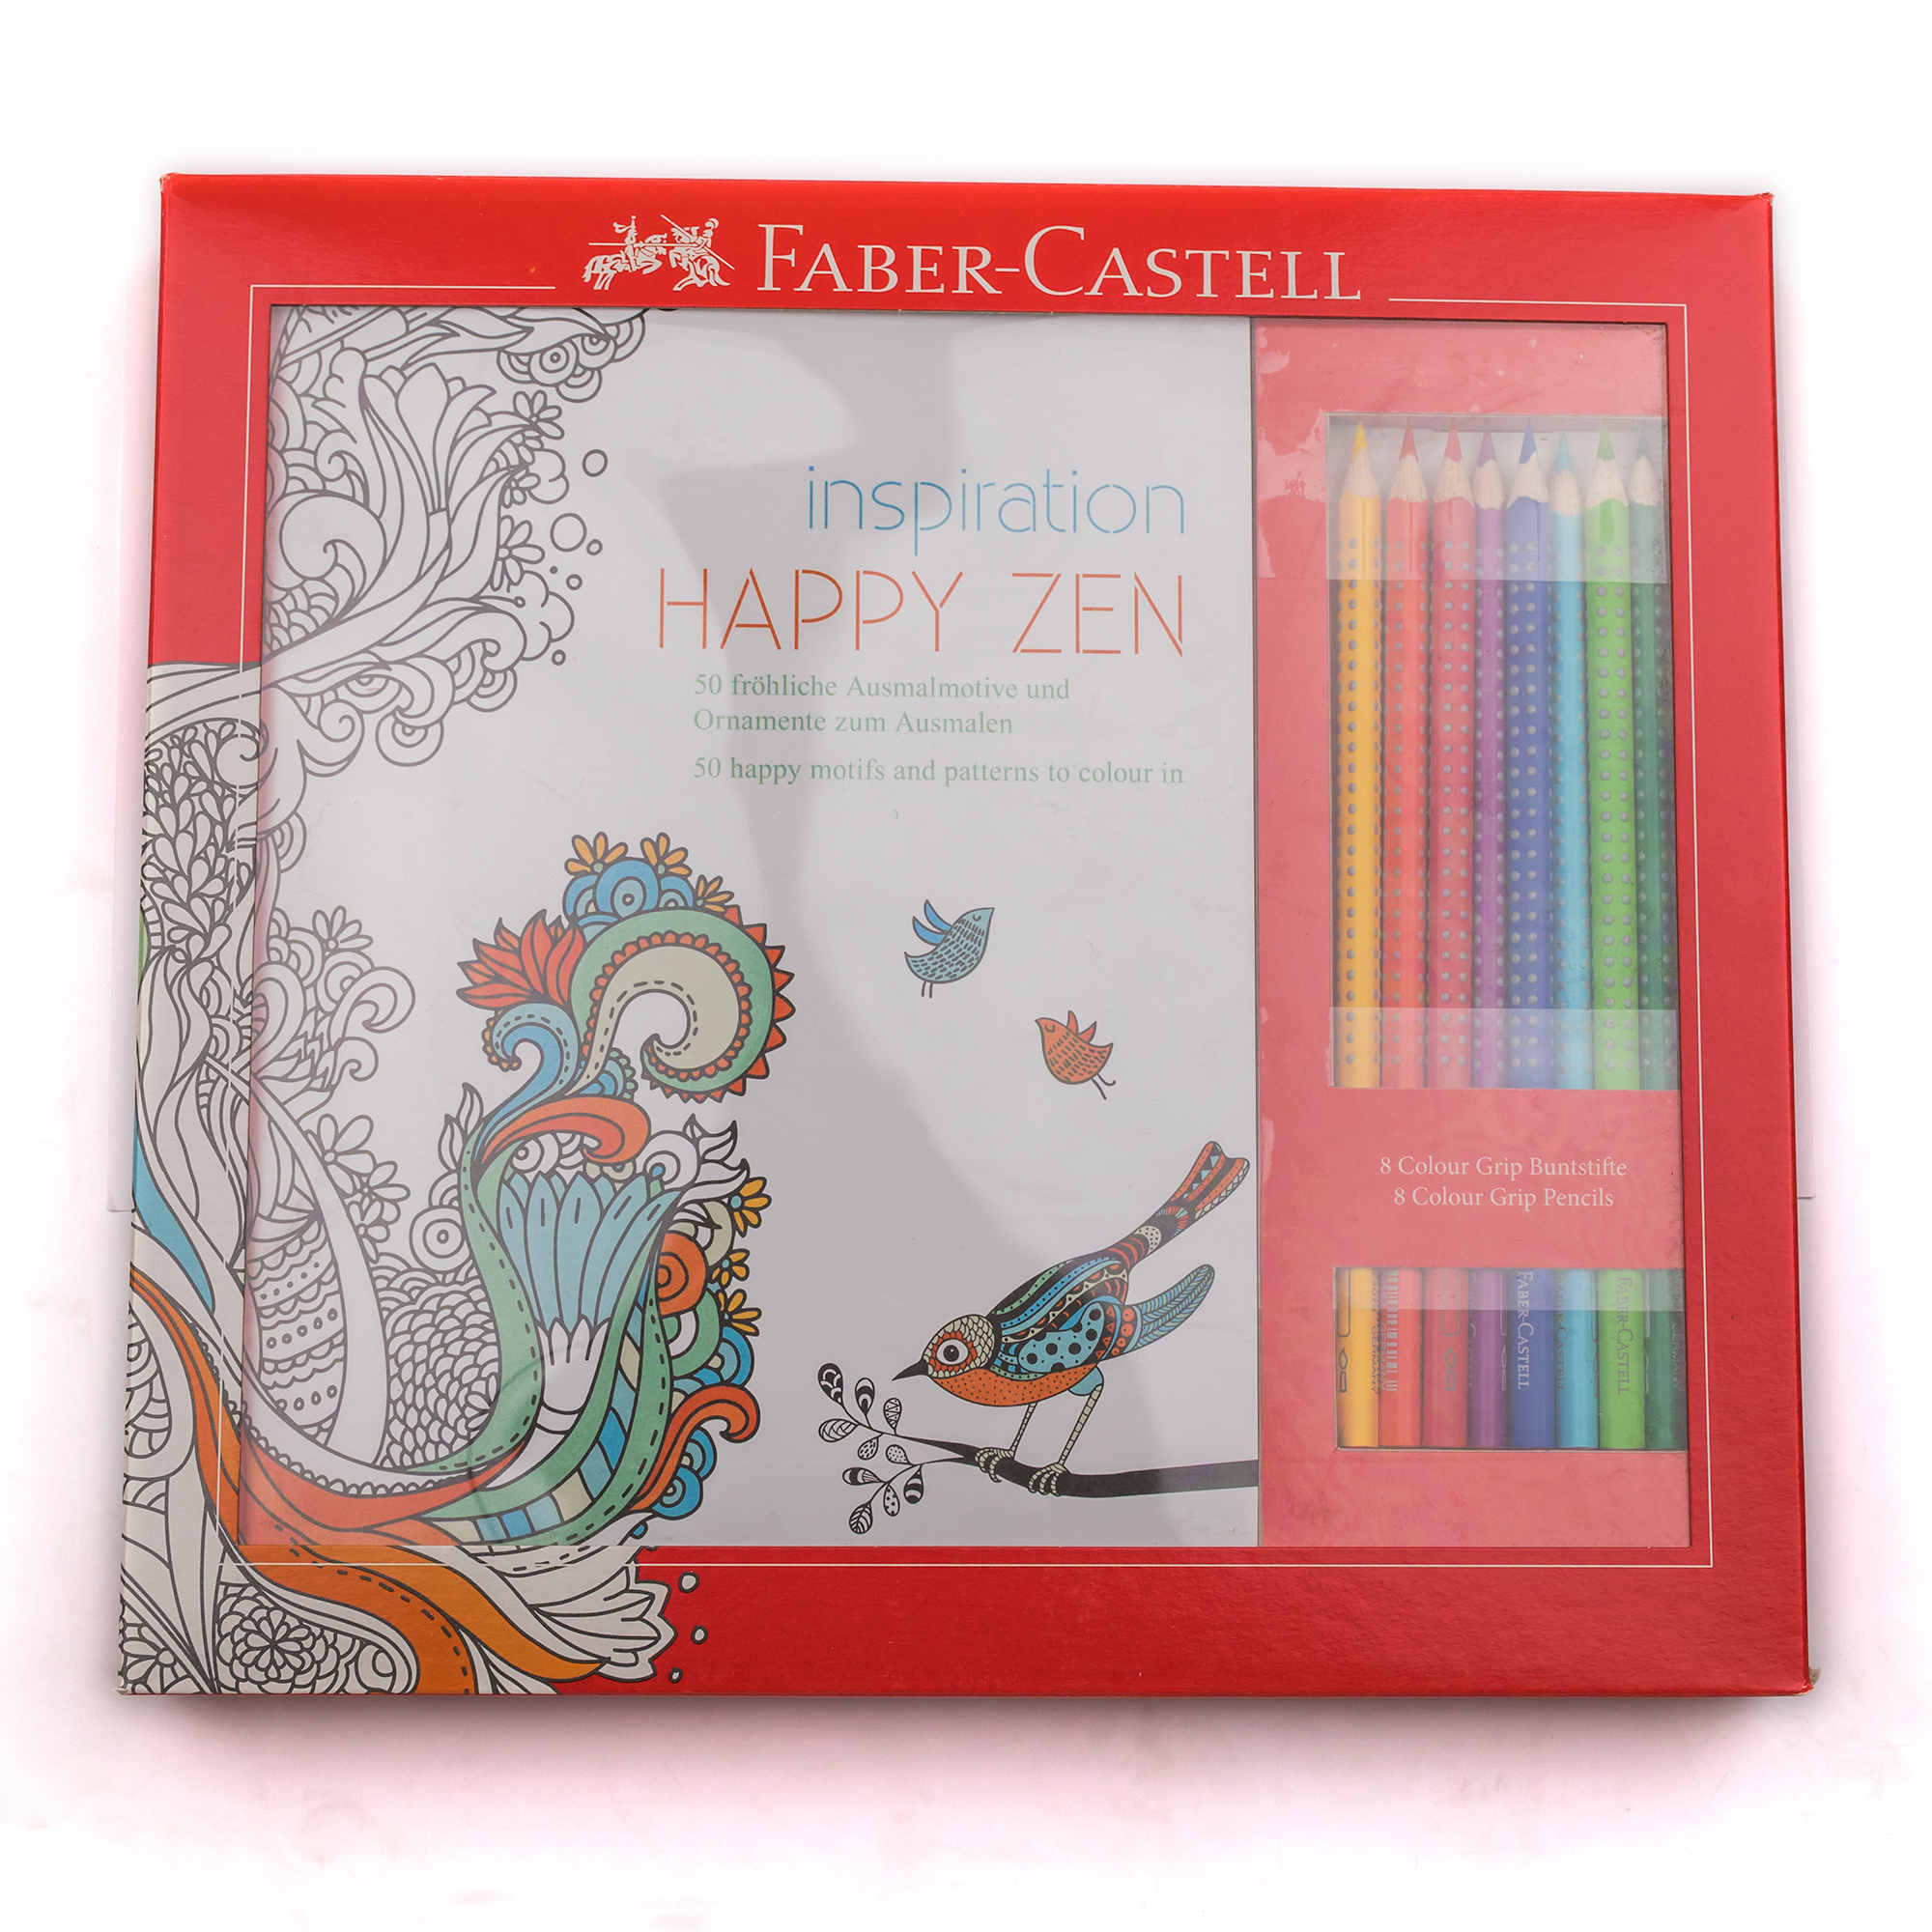 Faber-Castell Inspiration Happy Zen Set Coloring Book and 8 pencils for Adults